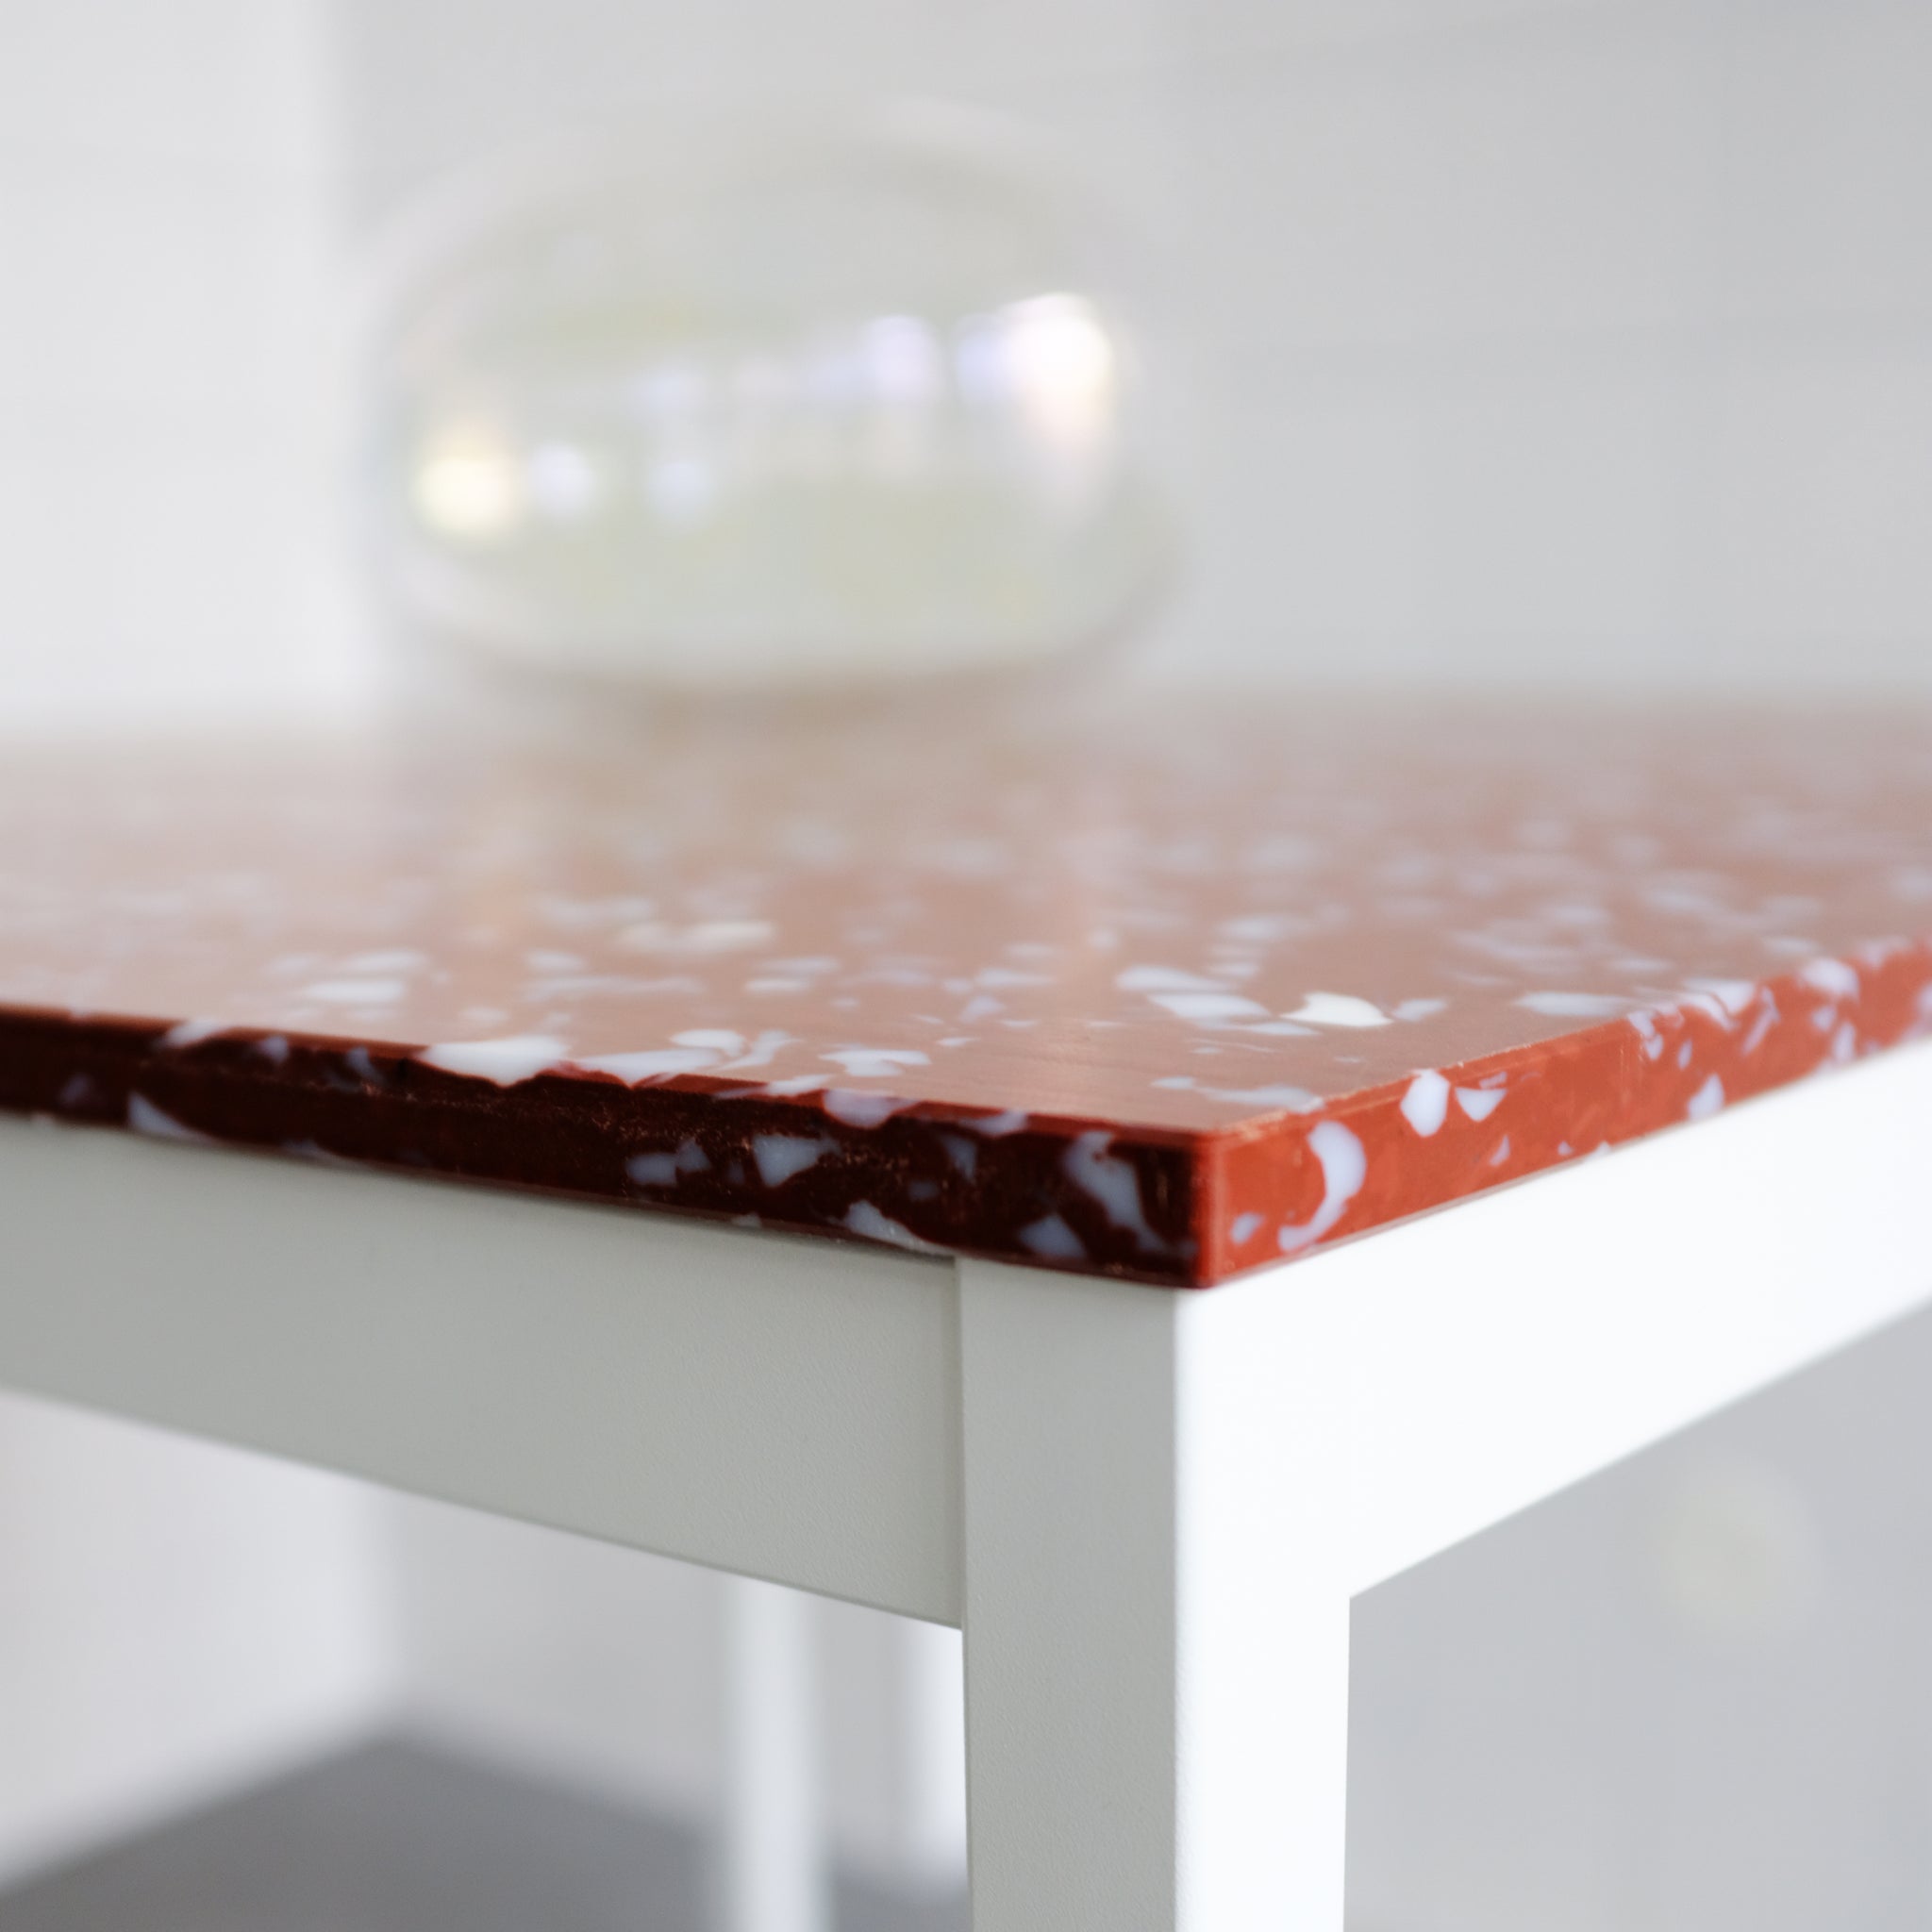 DETAIL OF RED TABLE TOP BY THE MINIMONO PROJECT - BRAND FOR ECO FRIENDLY - PLAYFUL - MULTI FUNCTIONAL - SUSTAINABLE - HIGH QUALITY - DESIGN FURNITURE FROM RECYCLED PLASTIC FOR BOTH ADULT AND CHILDREN MADE IN BERLIN GERMANY